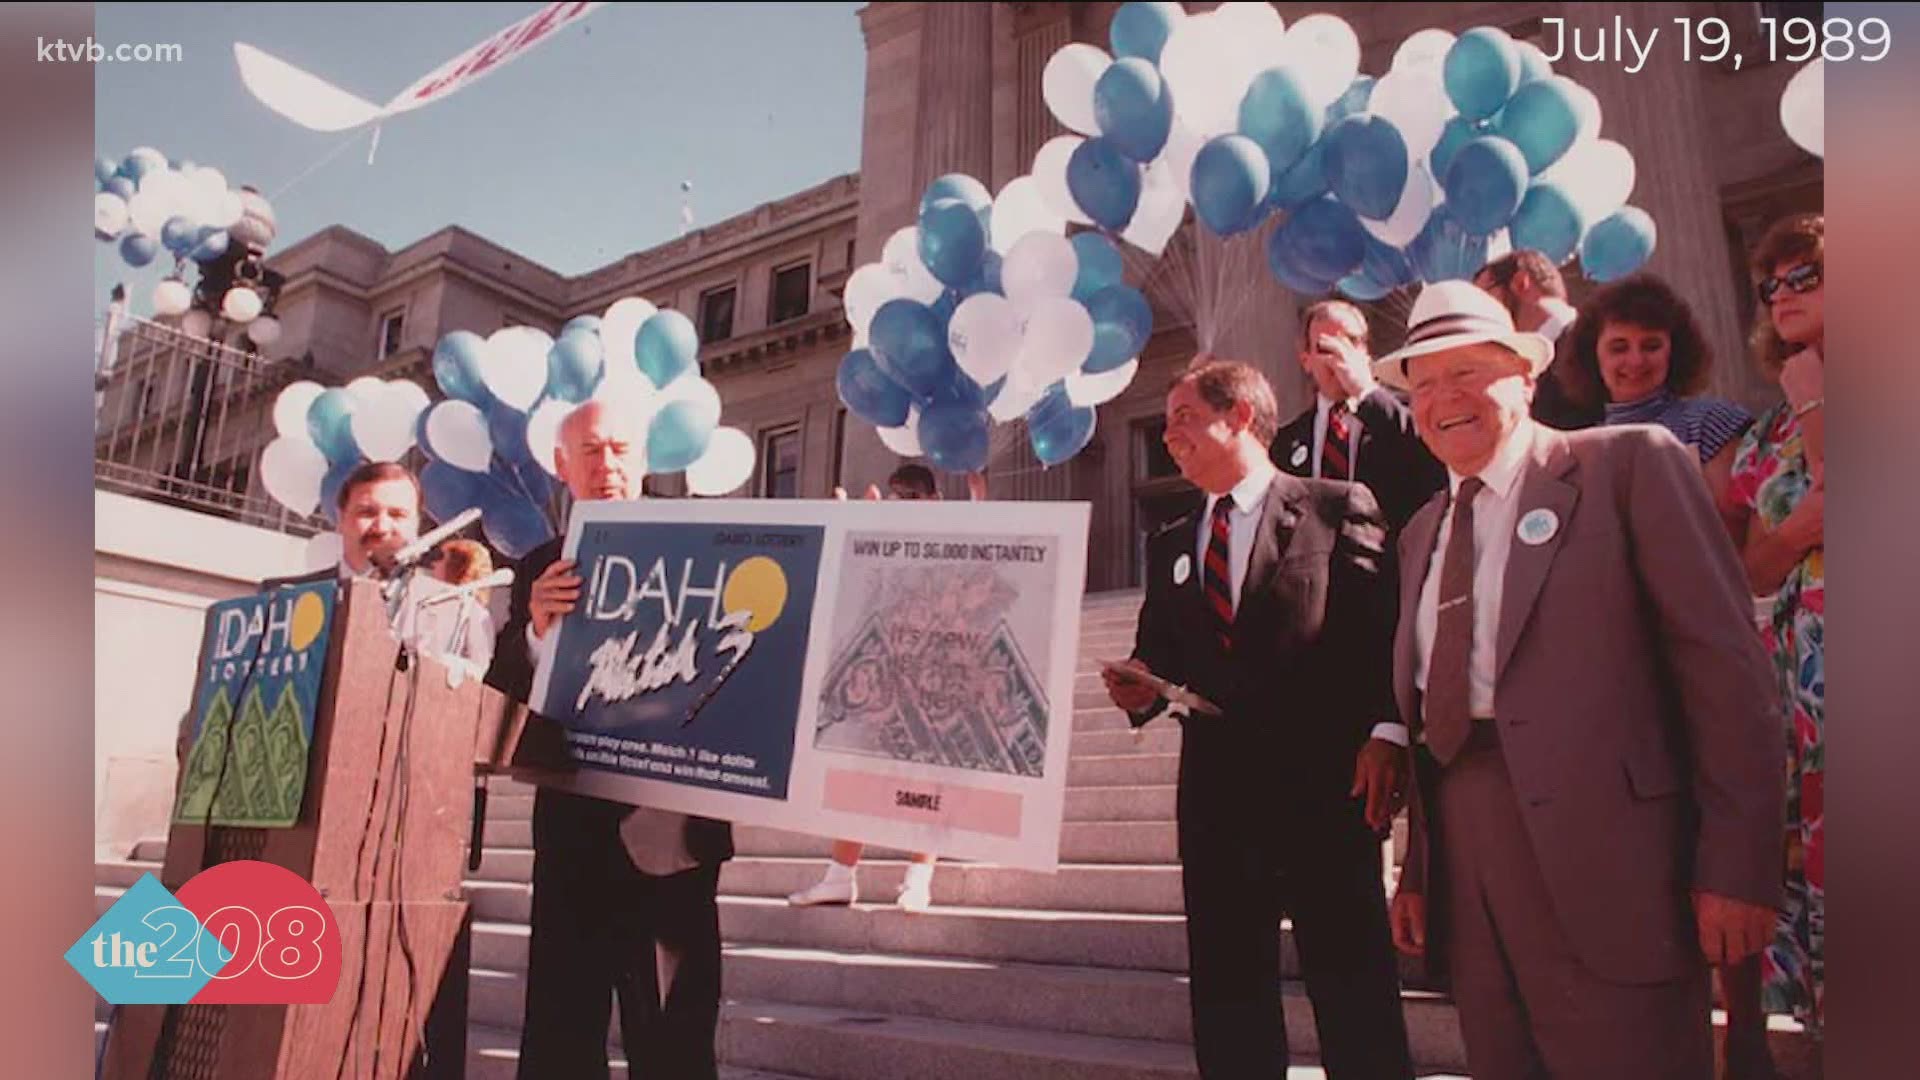 On the steps of the Idaho Statehouse, the Gem State sold its first lottery ticket to billionaire J.R. Simplot.